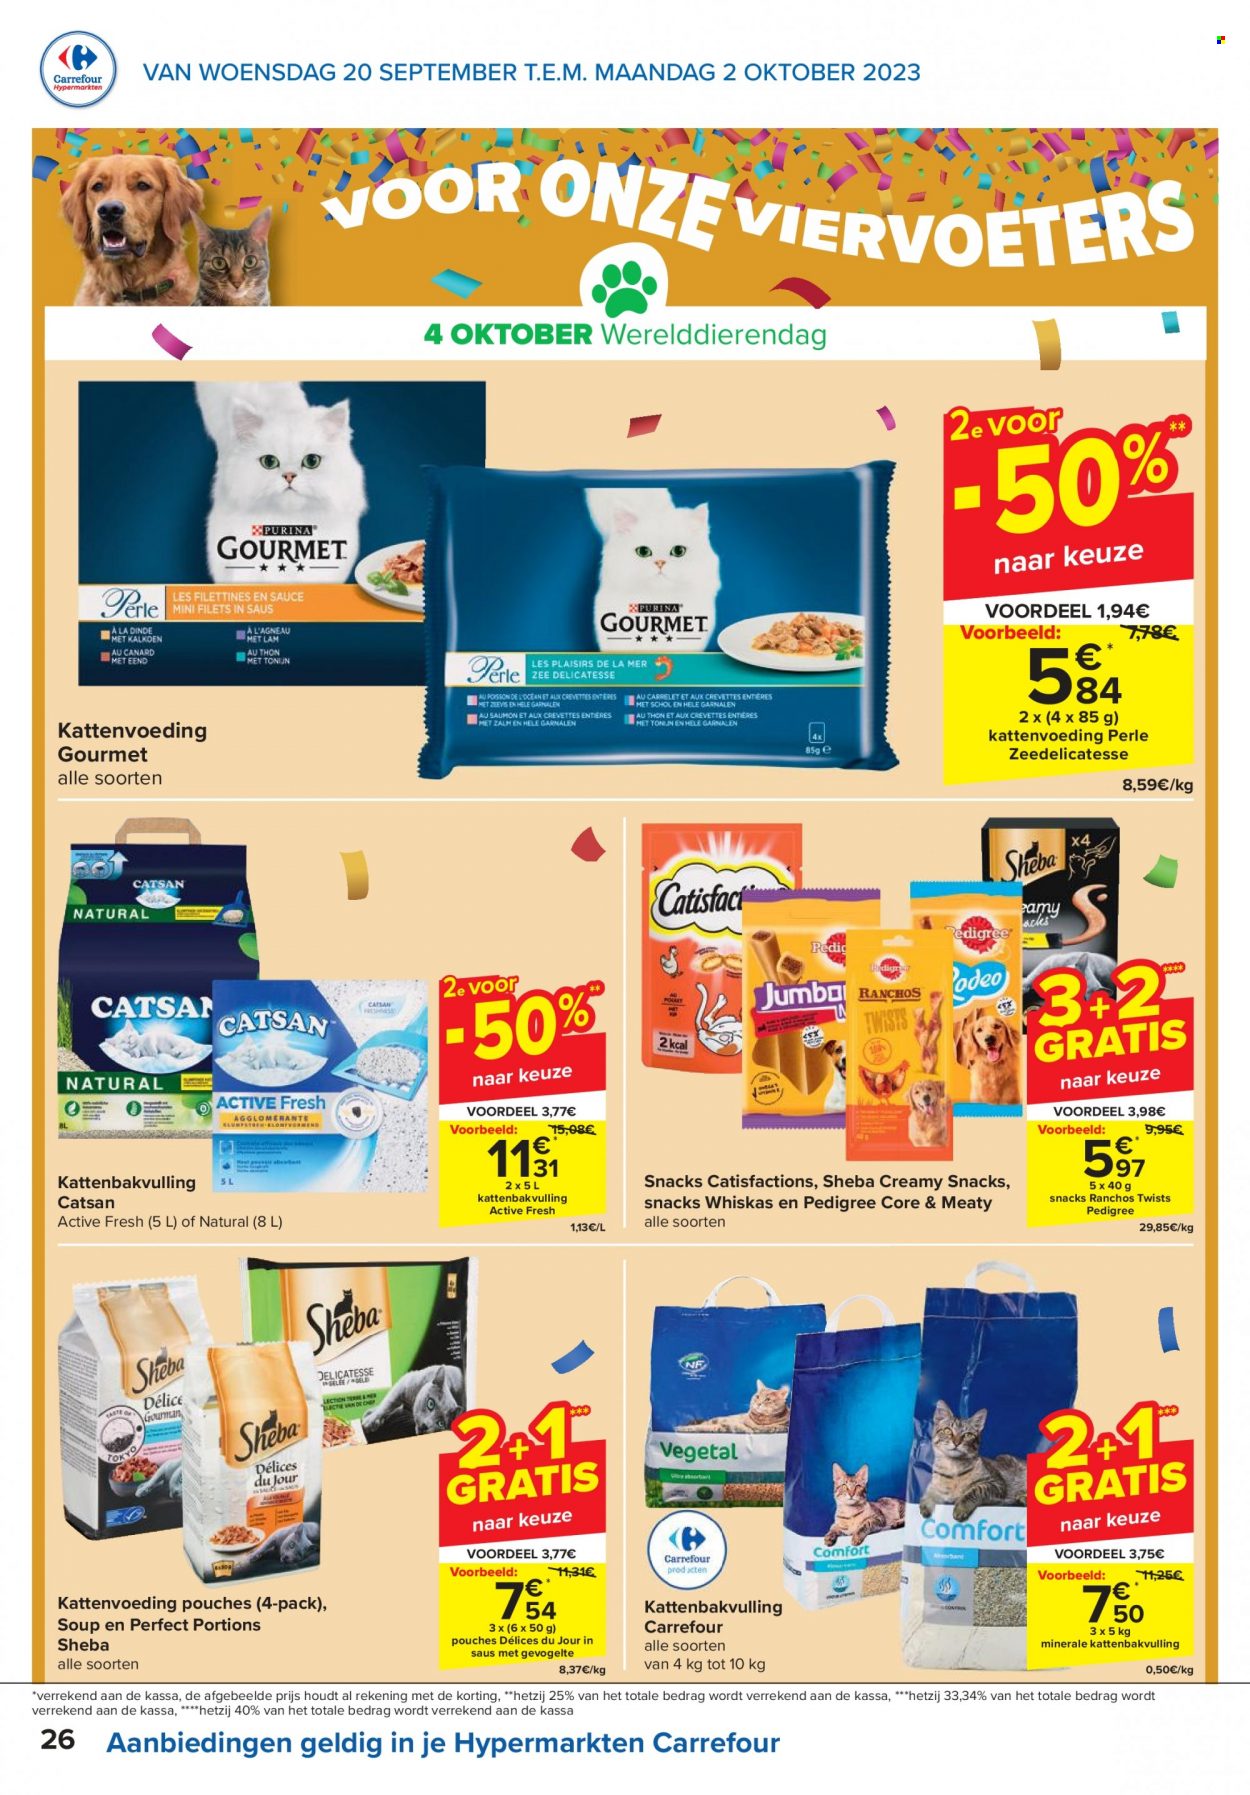 Catalogue Carrefour hypermarkt - 20.9.2023 - 2.10.2023. Page 26.